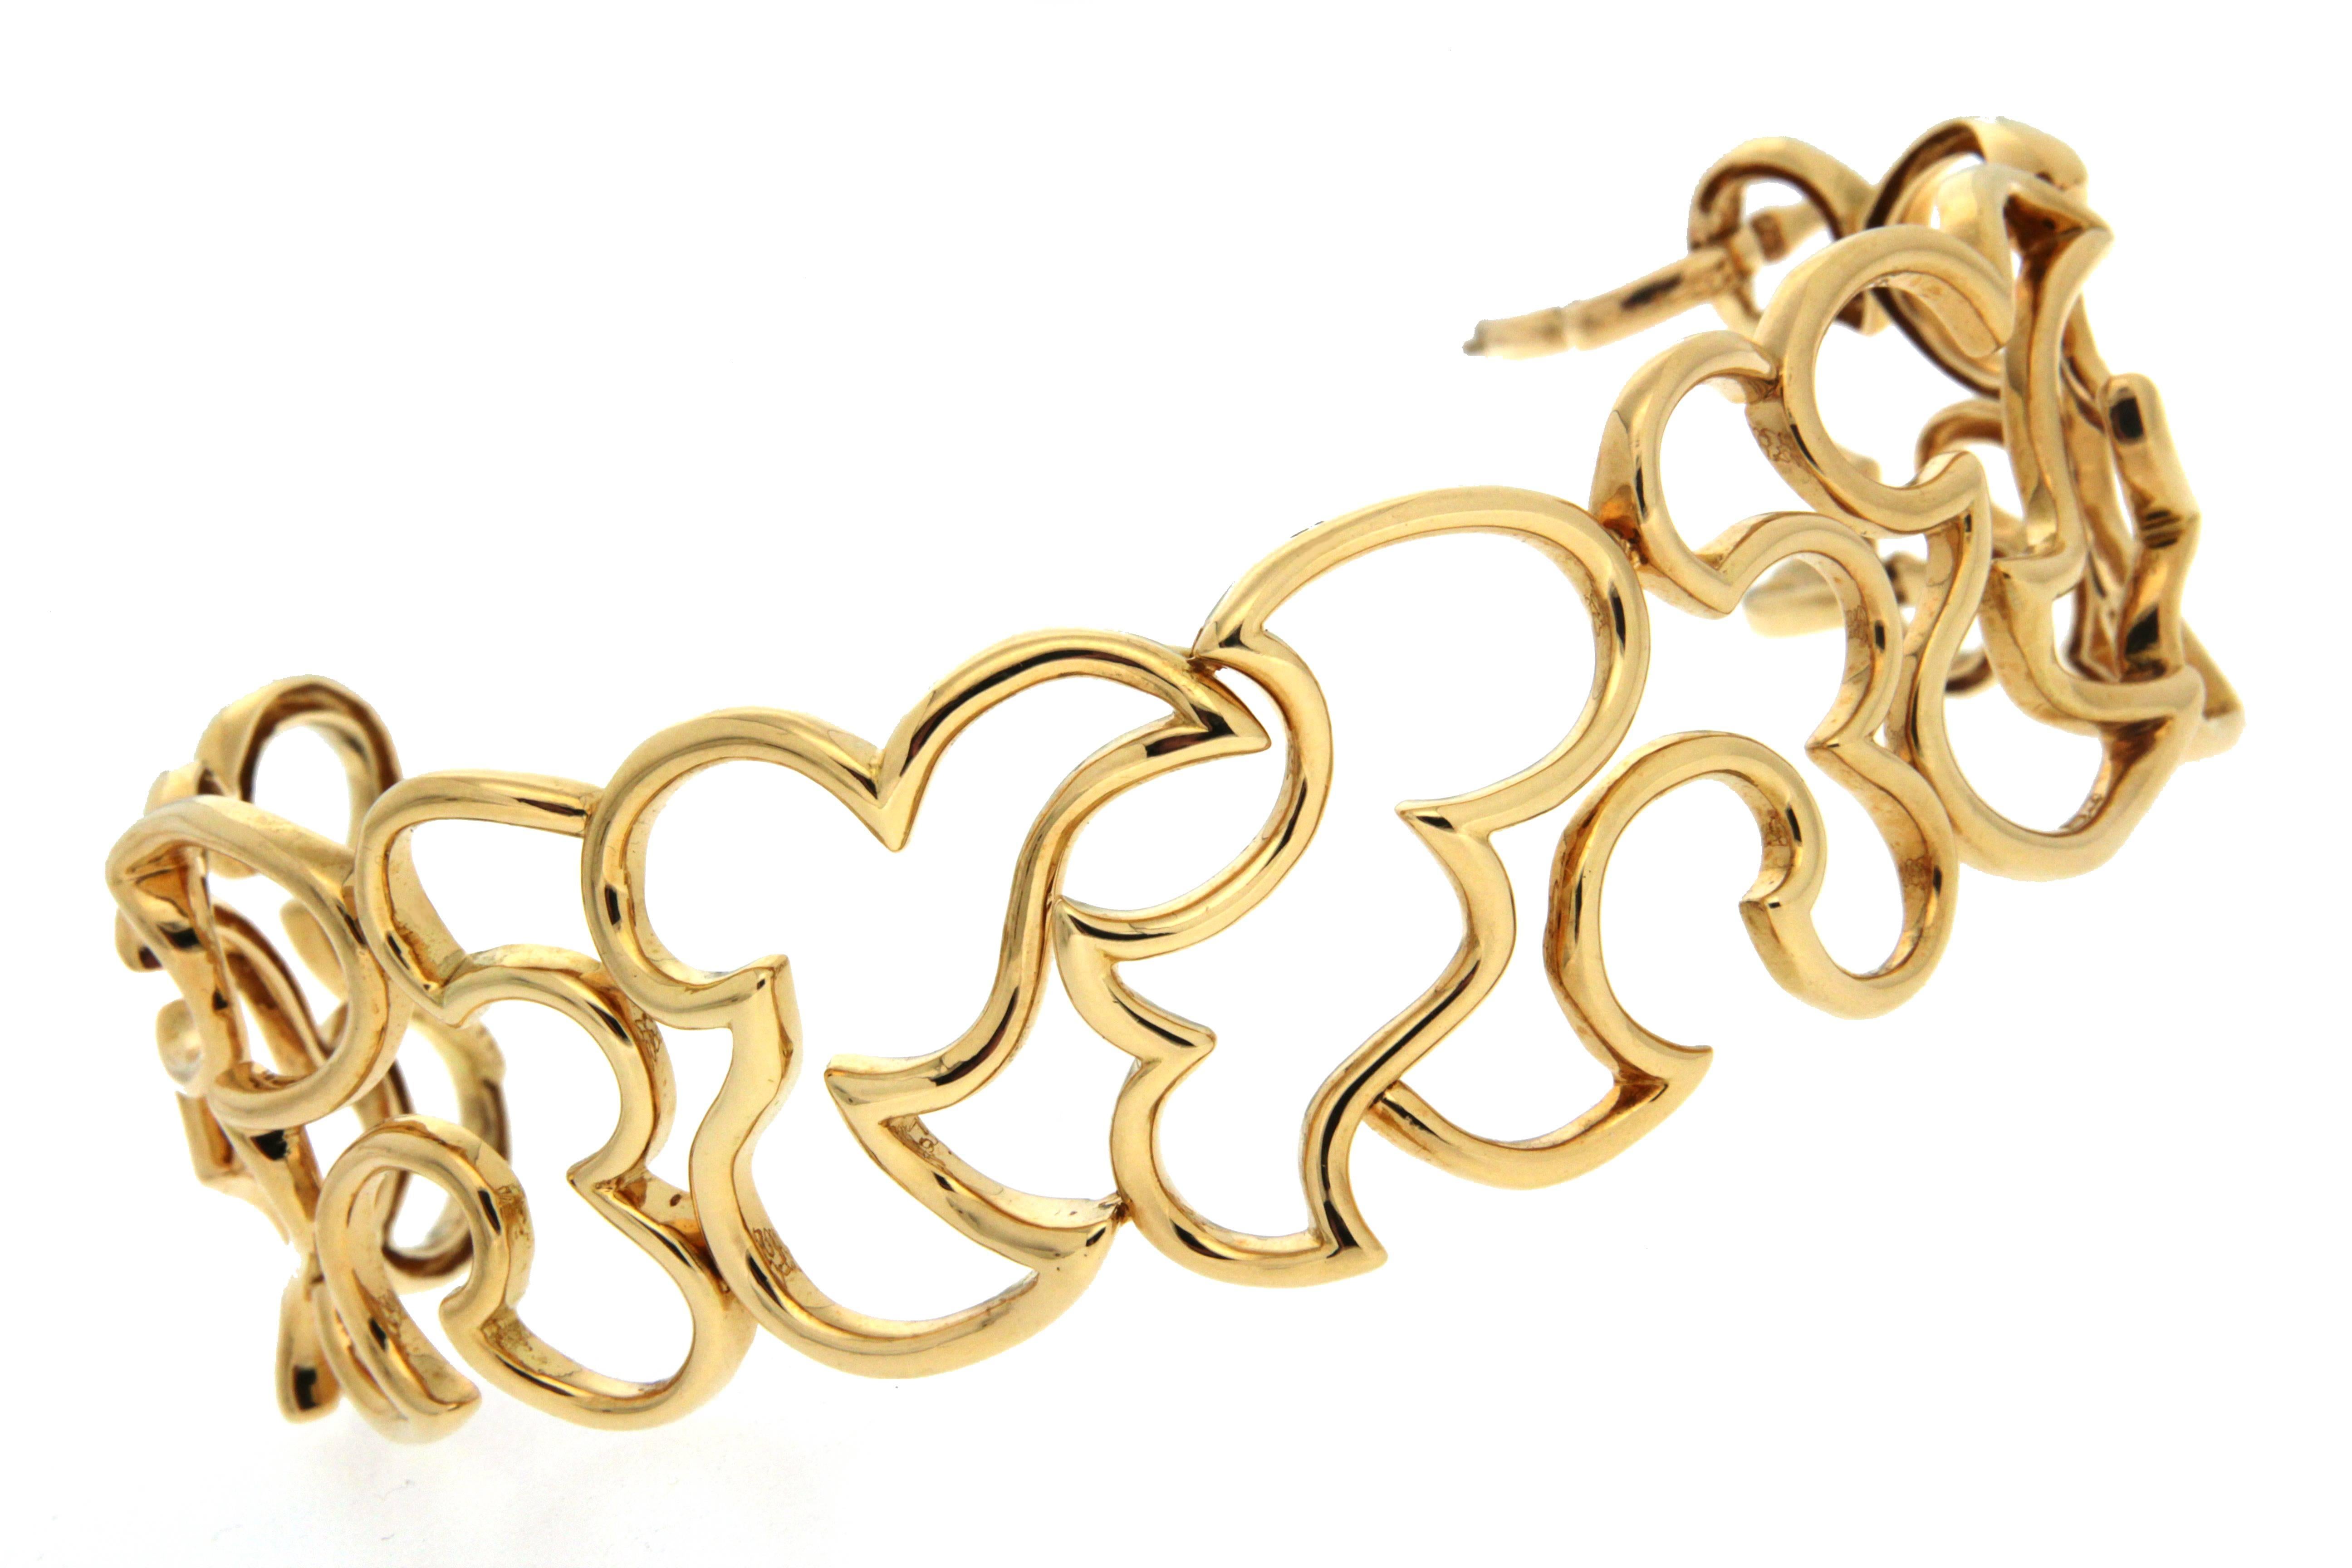 This  scroll bracelet with irregular shape and patterns is completed in 18kt yellow gold.